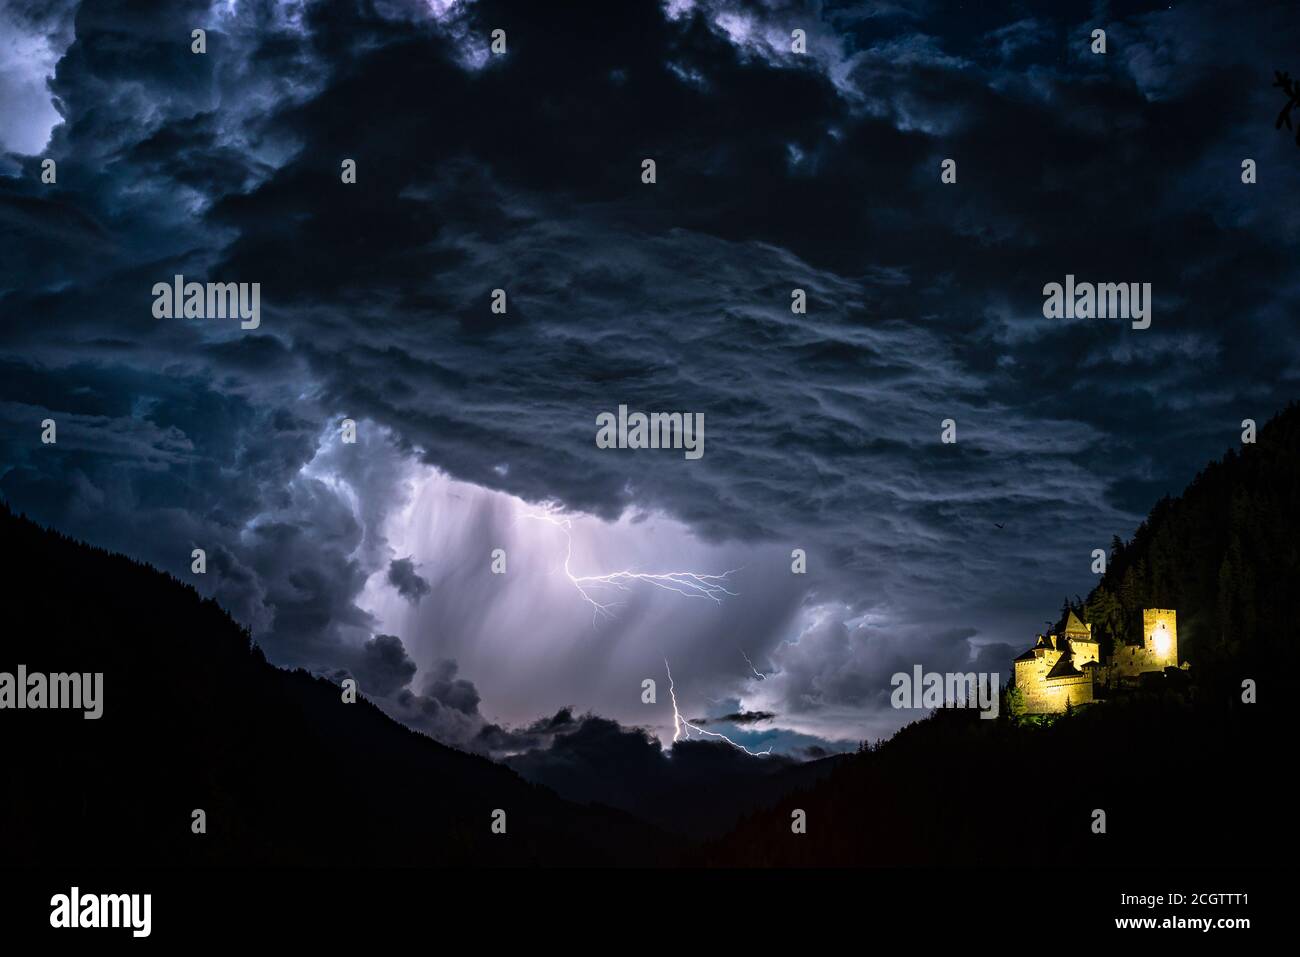 Dramatic sky with thunderstorm and lightning near a castle in the mountains Stock Photo